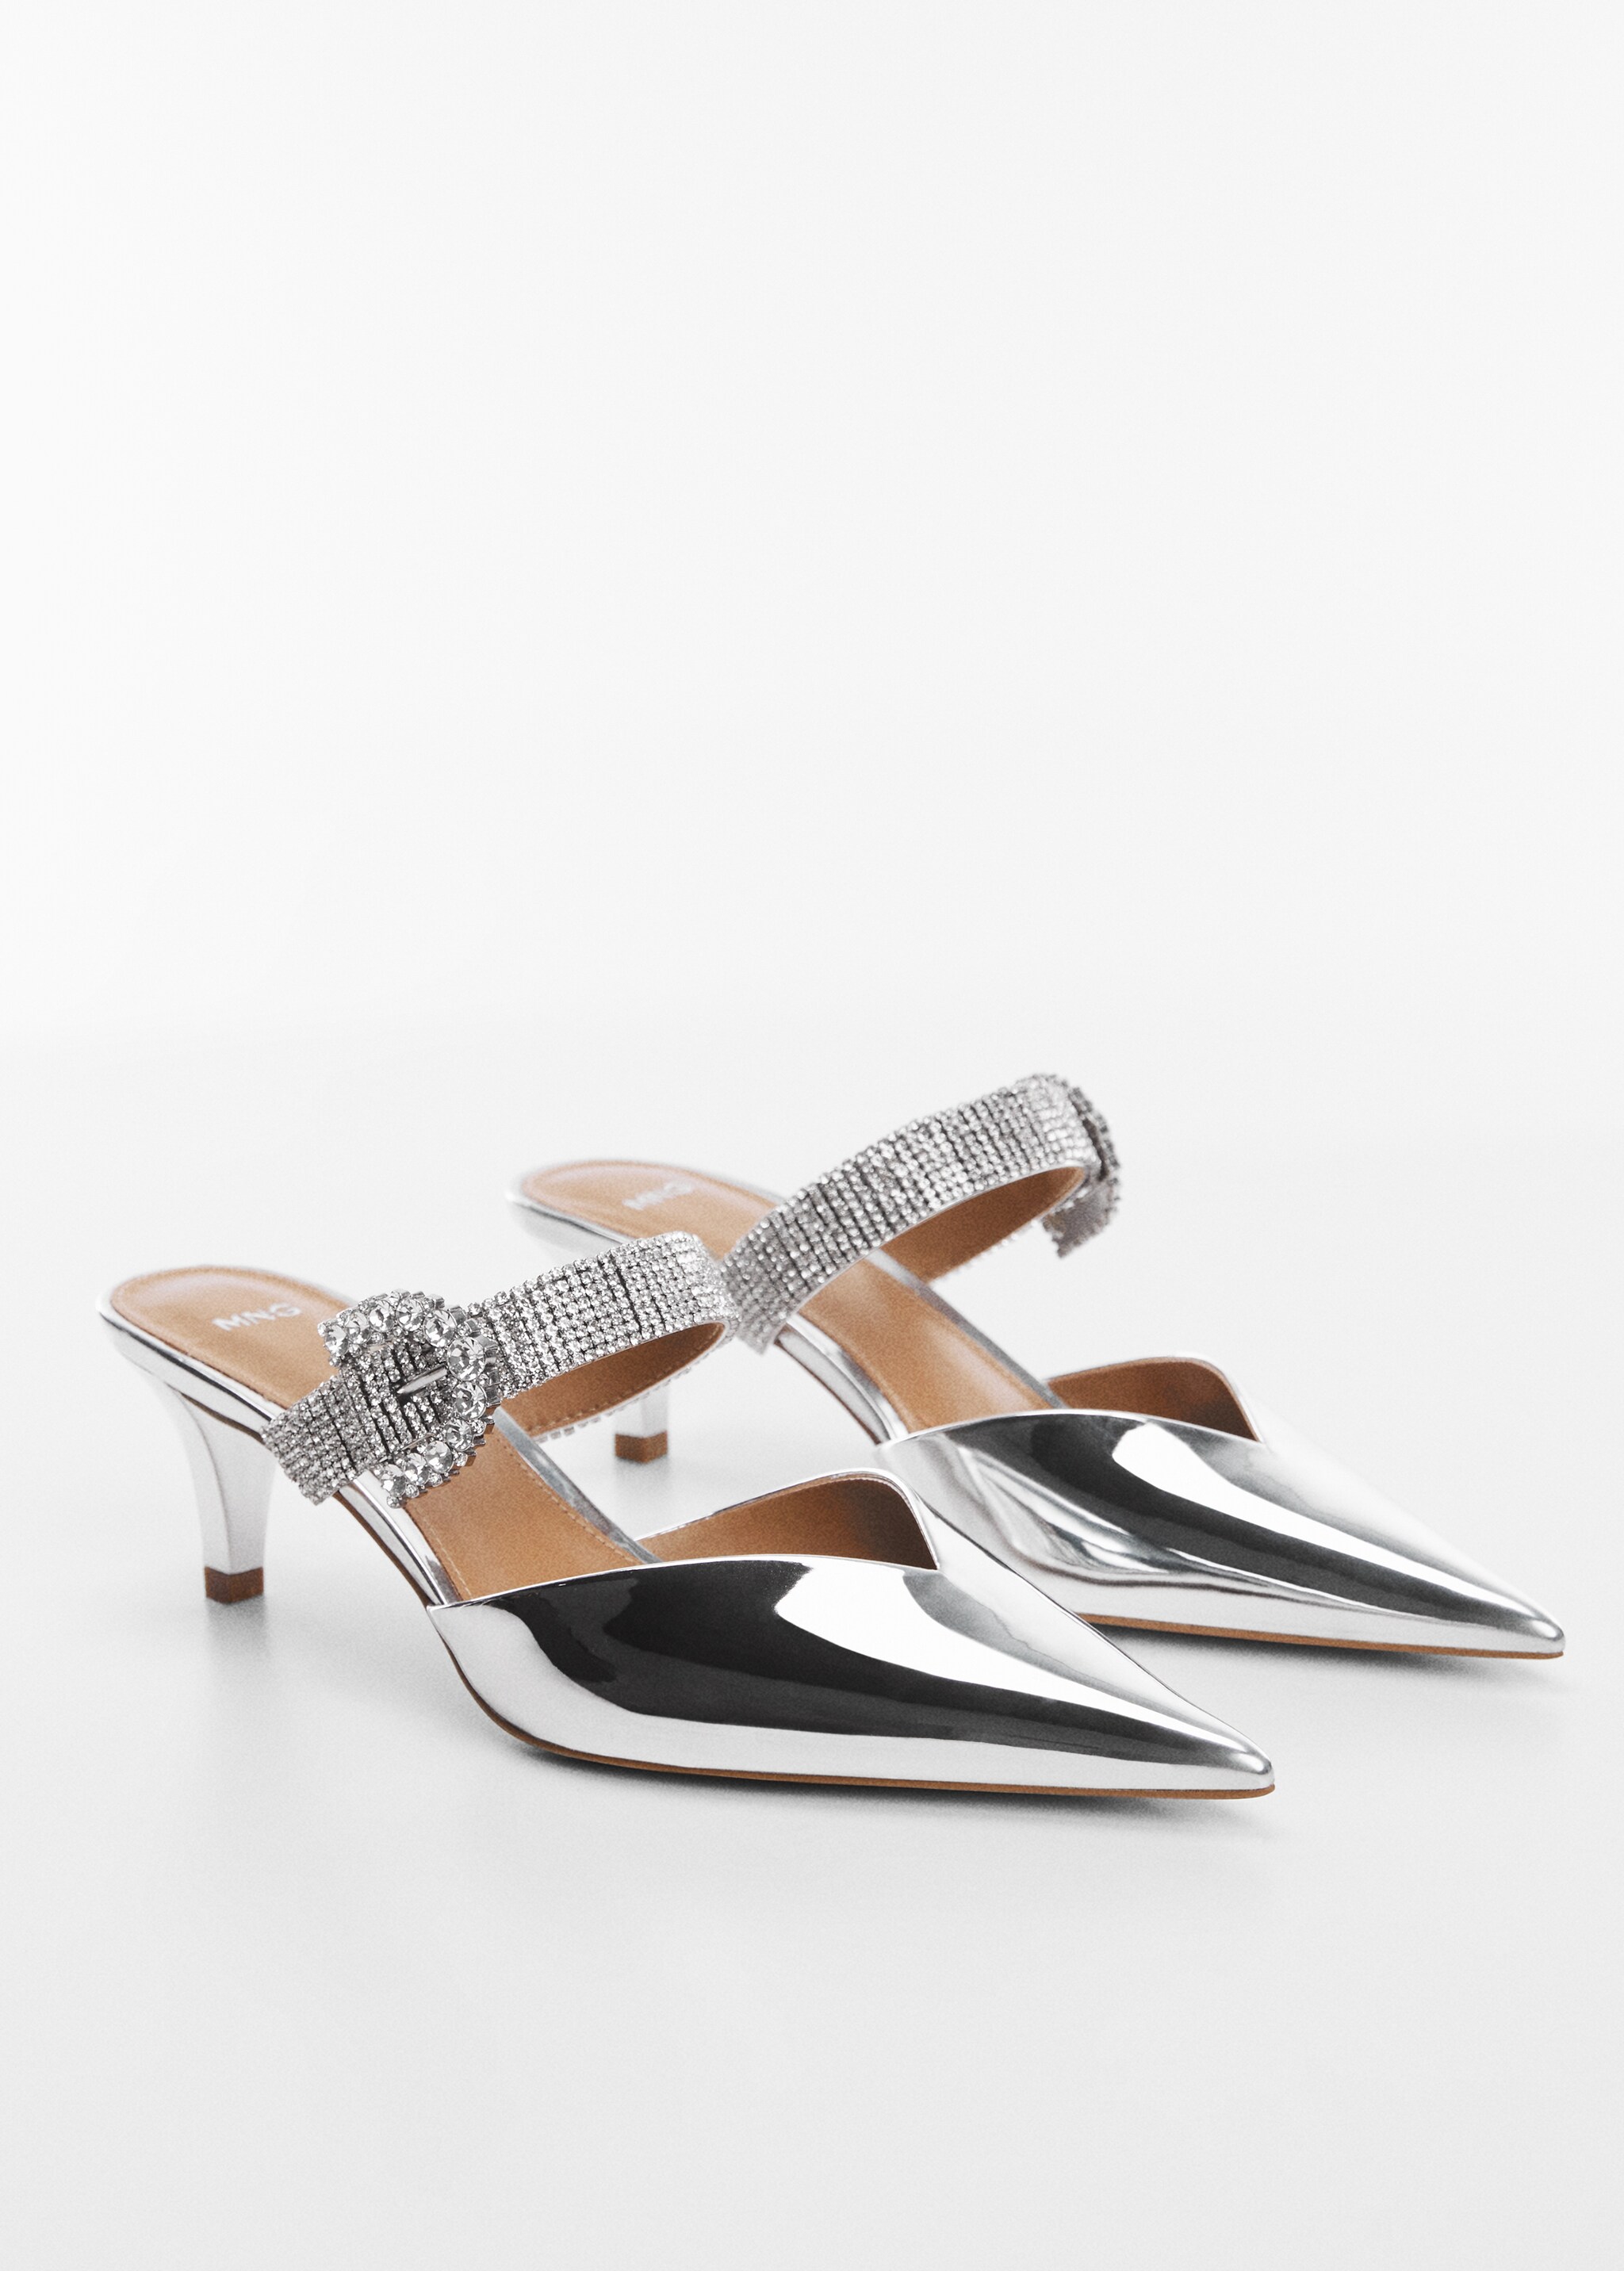 Pointed shoes with rhinestone detail - Medium plane